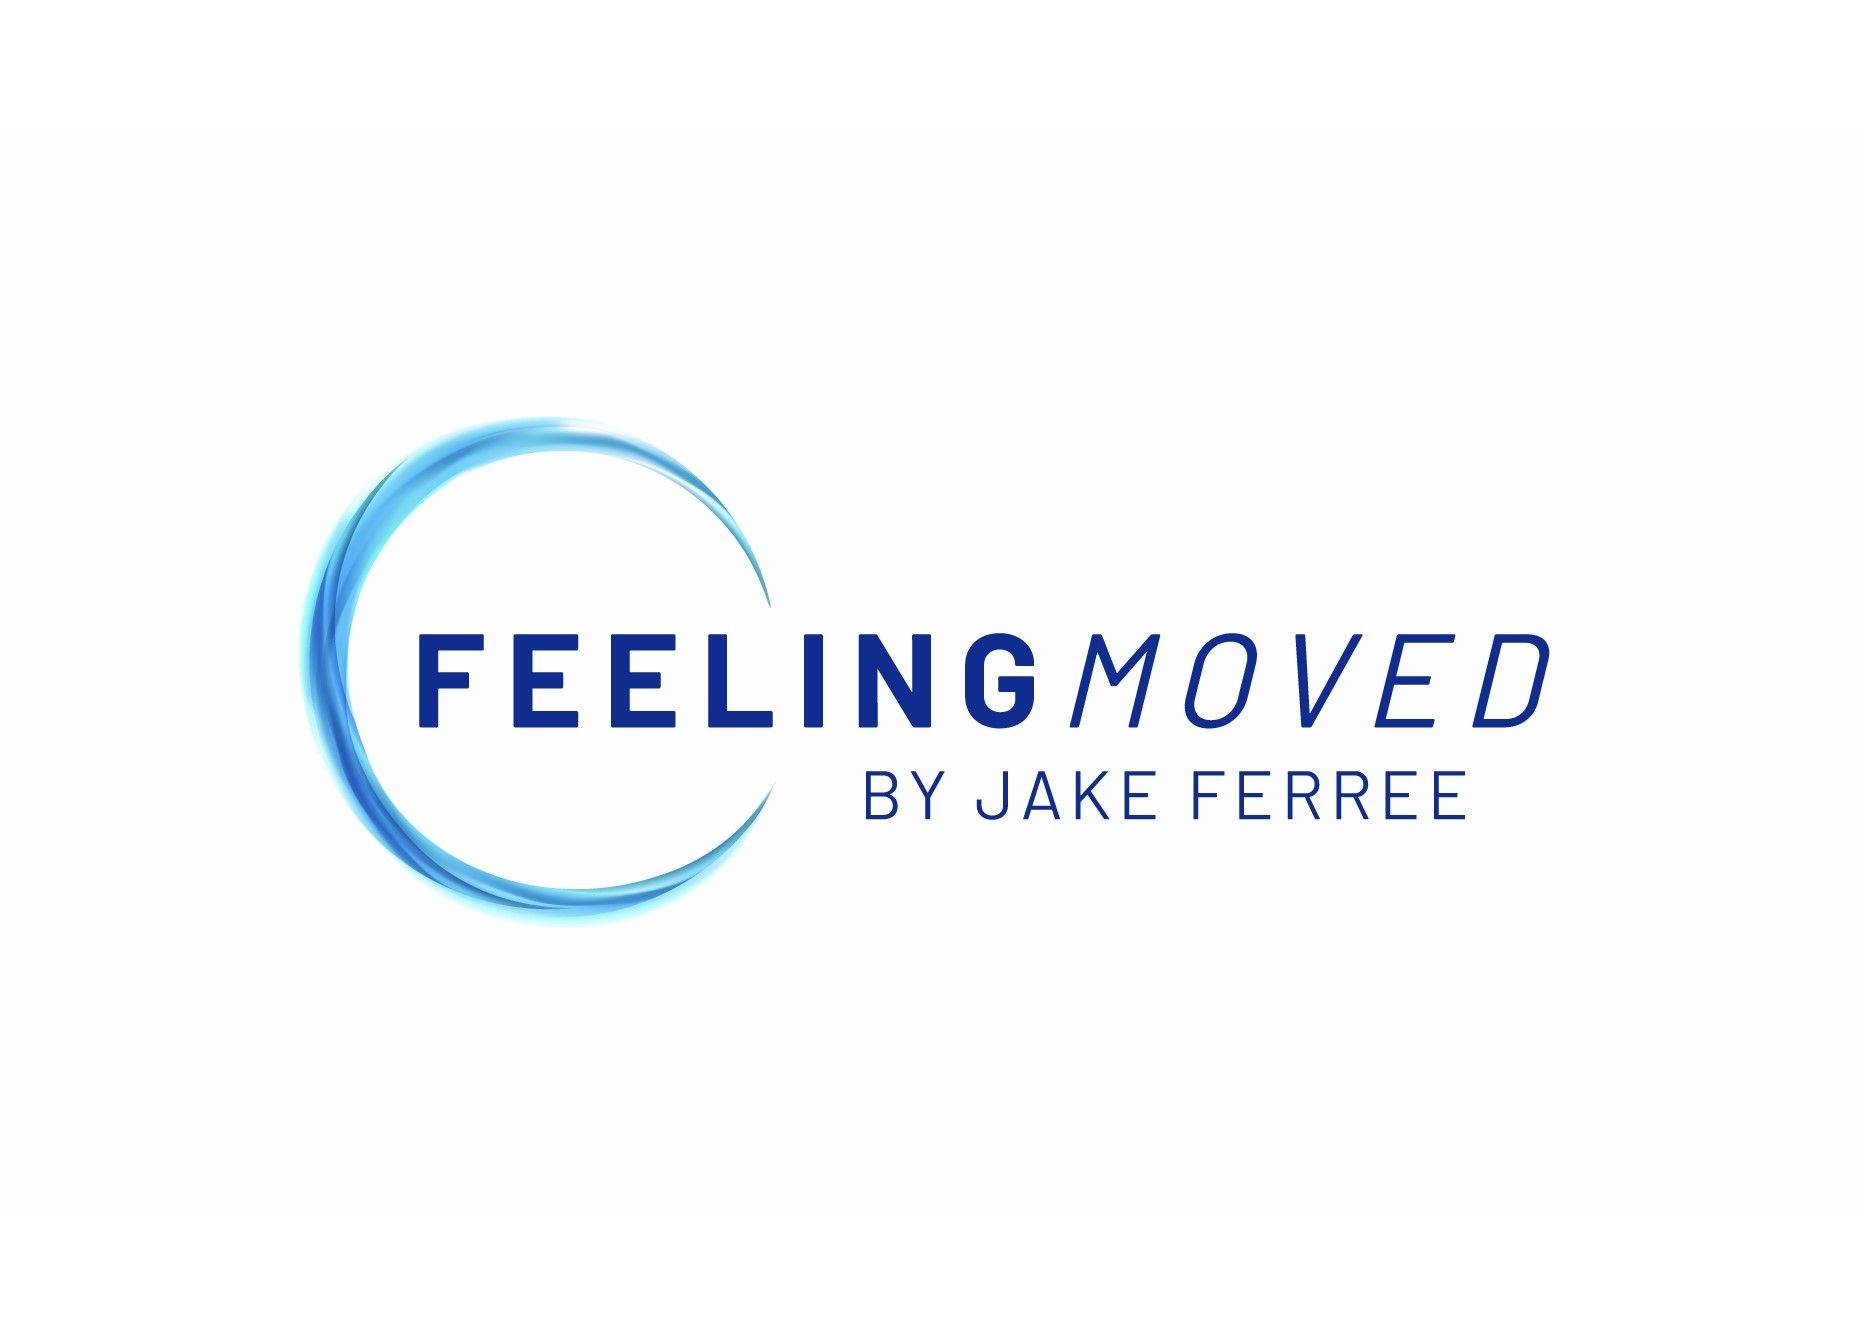 Personal Transformation Inside and Out - Jake Ferree